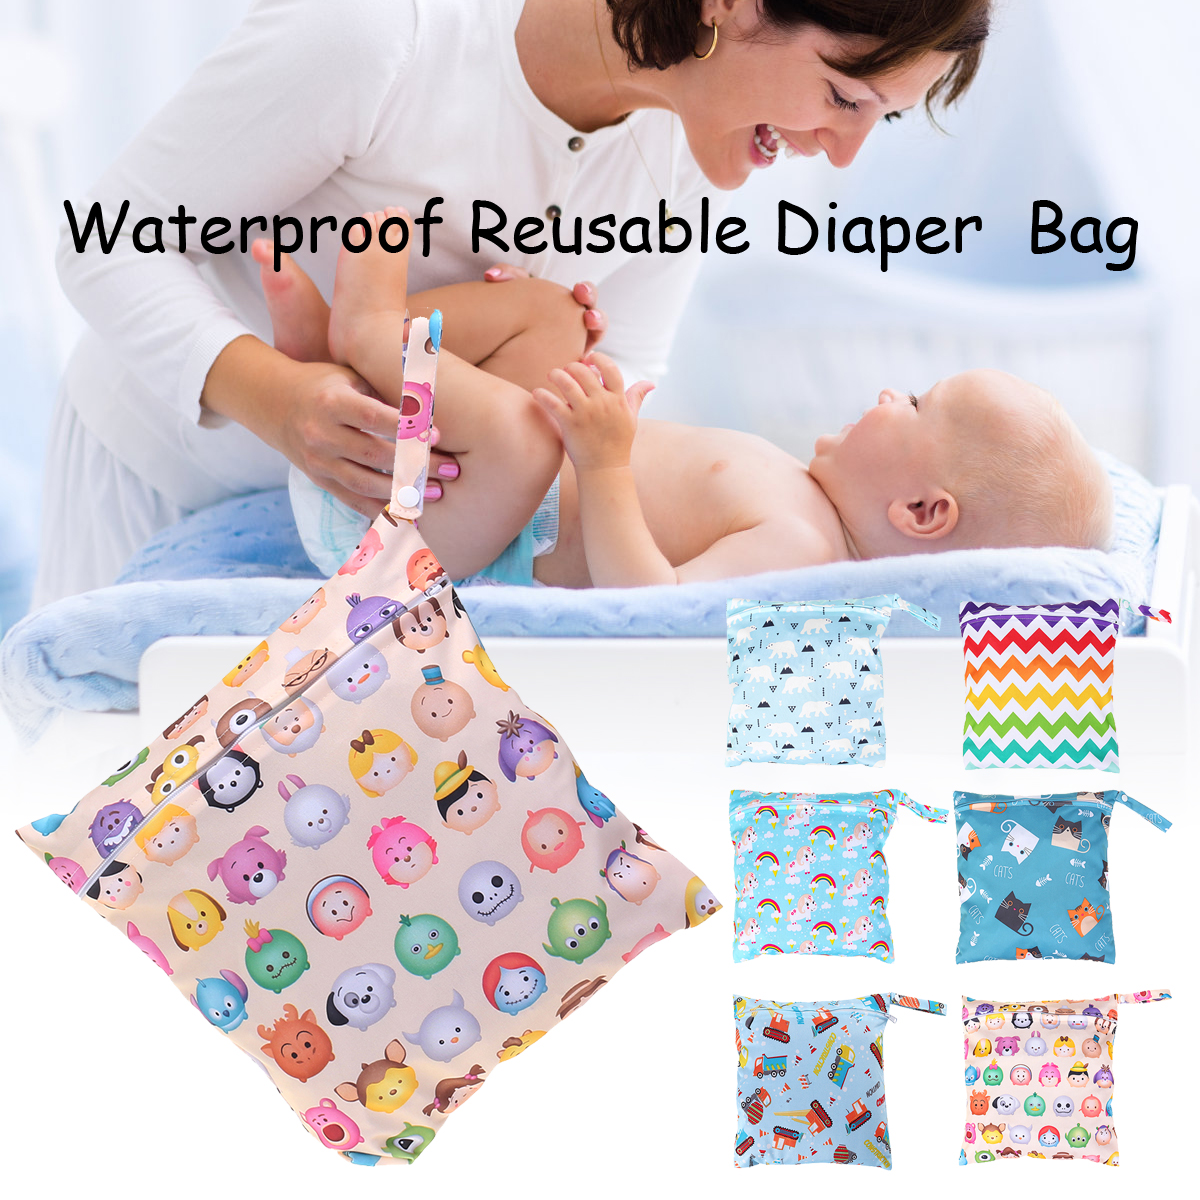 Reusable-Waterproof-Wet-Dry-Baby-Diapers-Bags-Portable-Travel-Baby-Nappy-Changing-Double-Pocket-Wetb-1647666-1